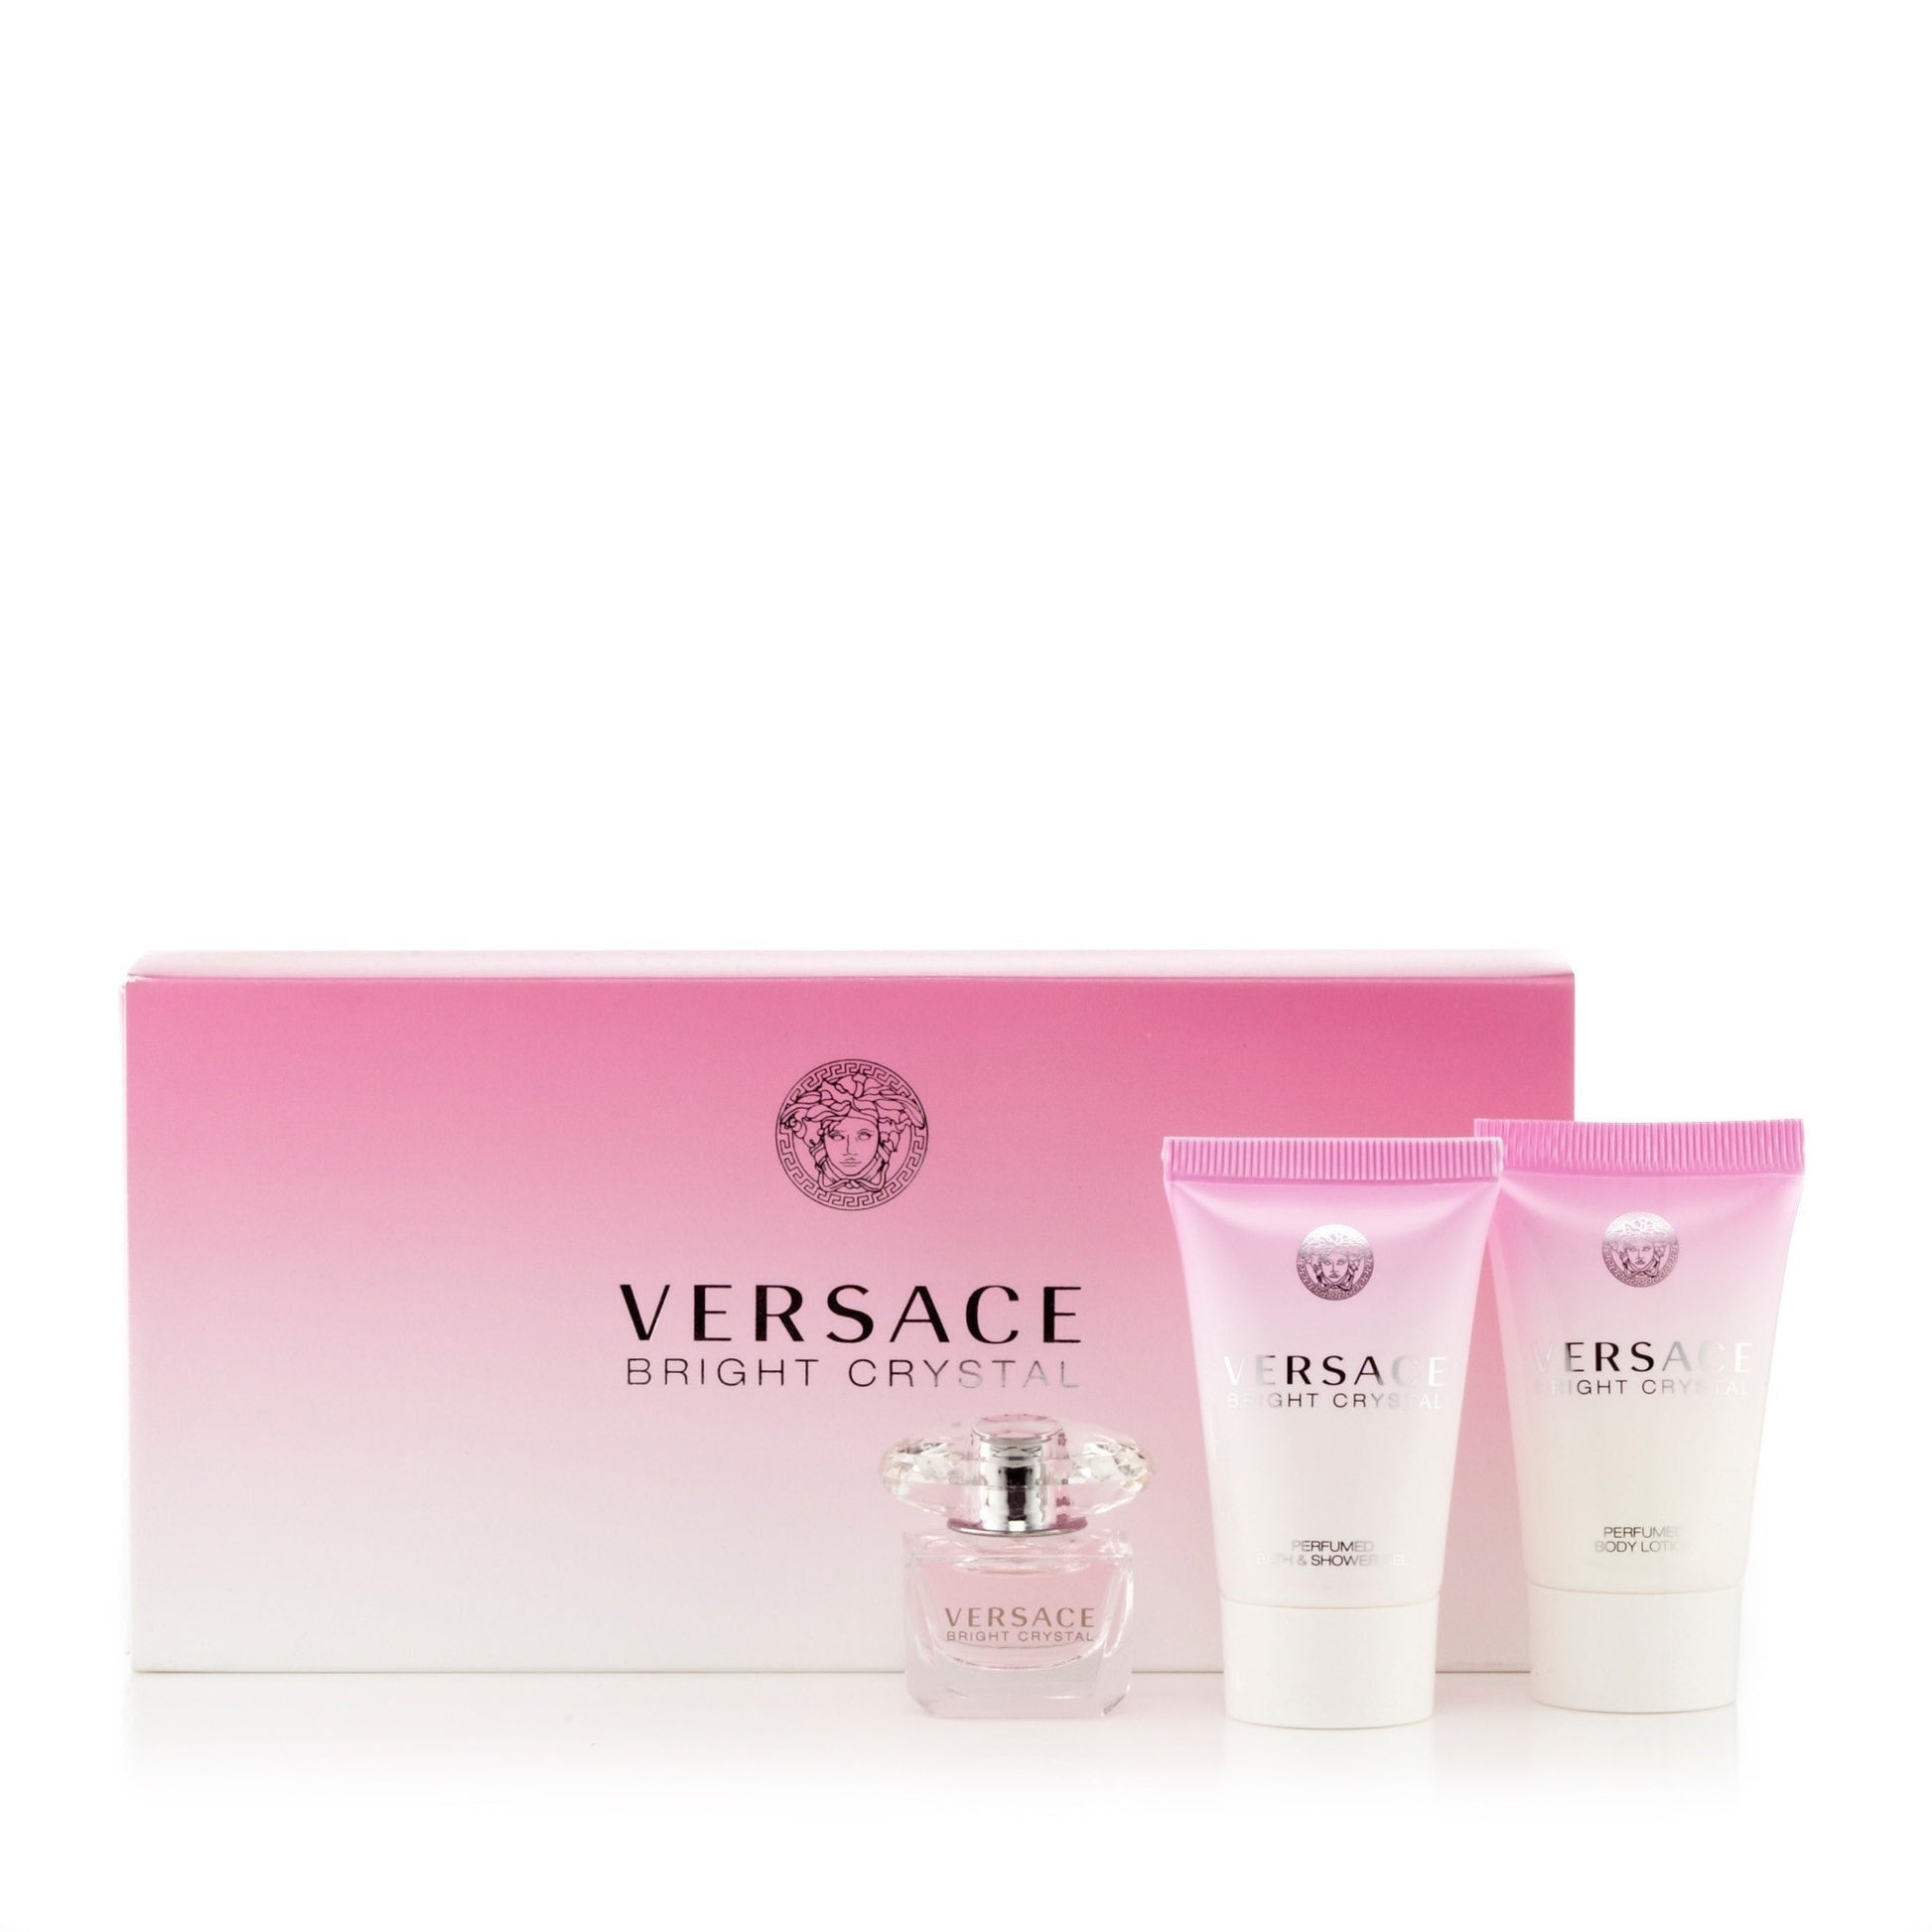 Versace Bright Crystal Gift Set Womens 0.17 oz.  Click to open in modal